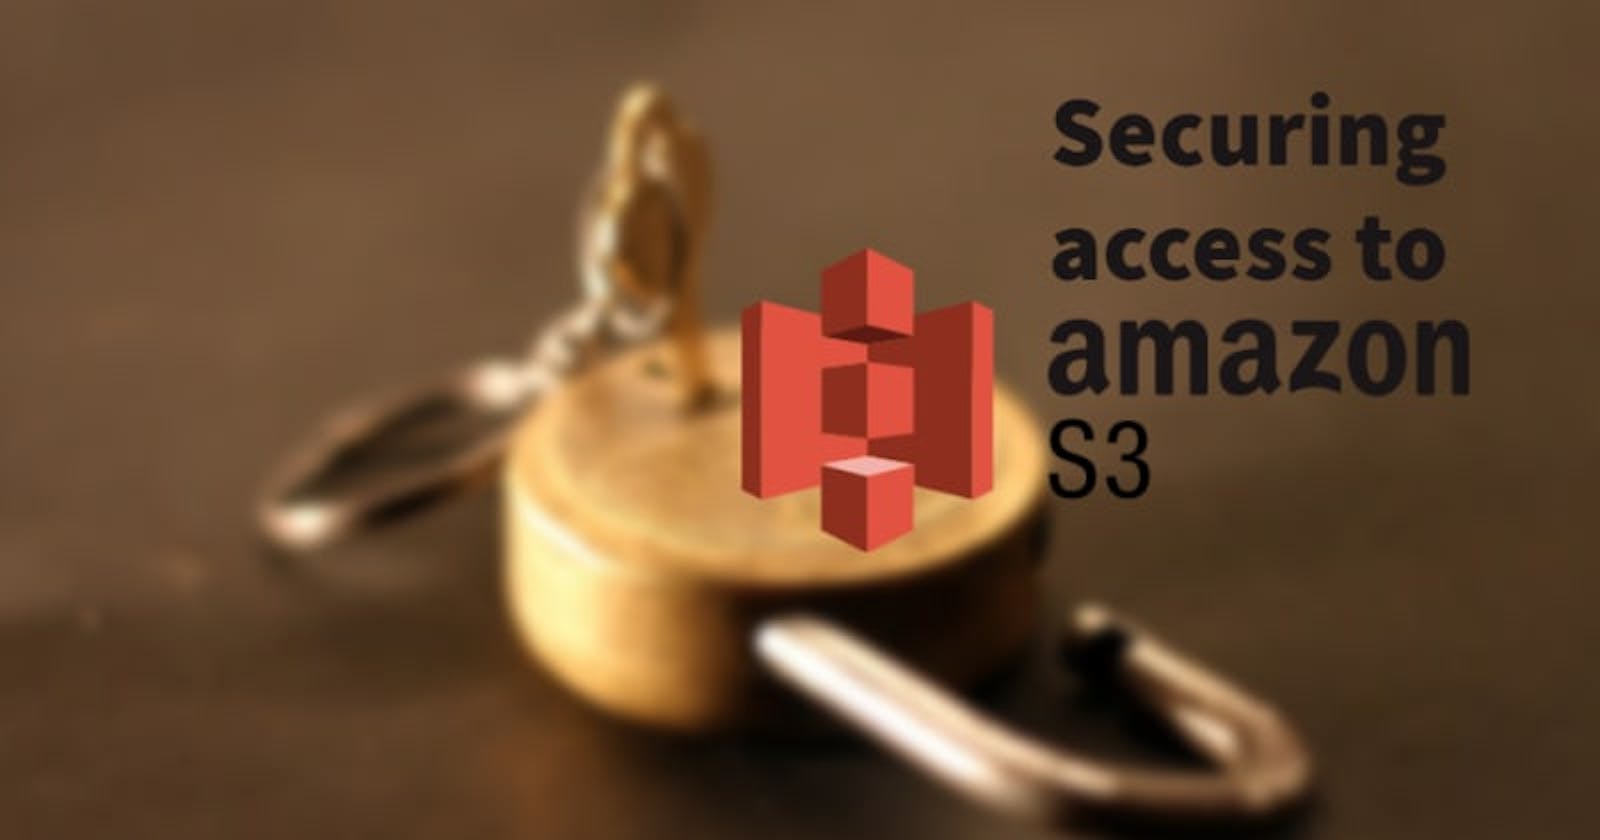 Securing access to S3 bucket